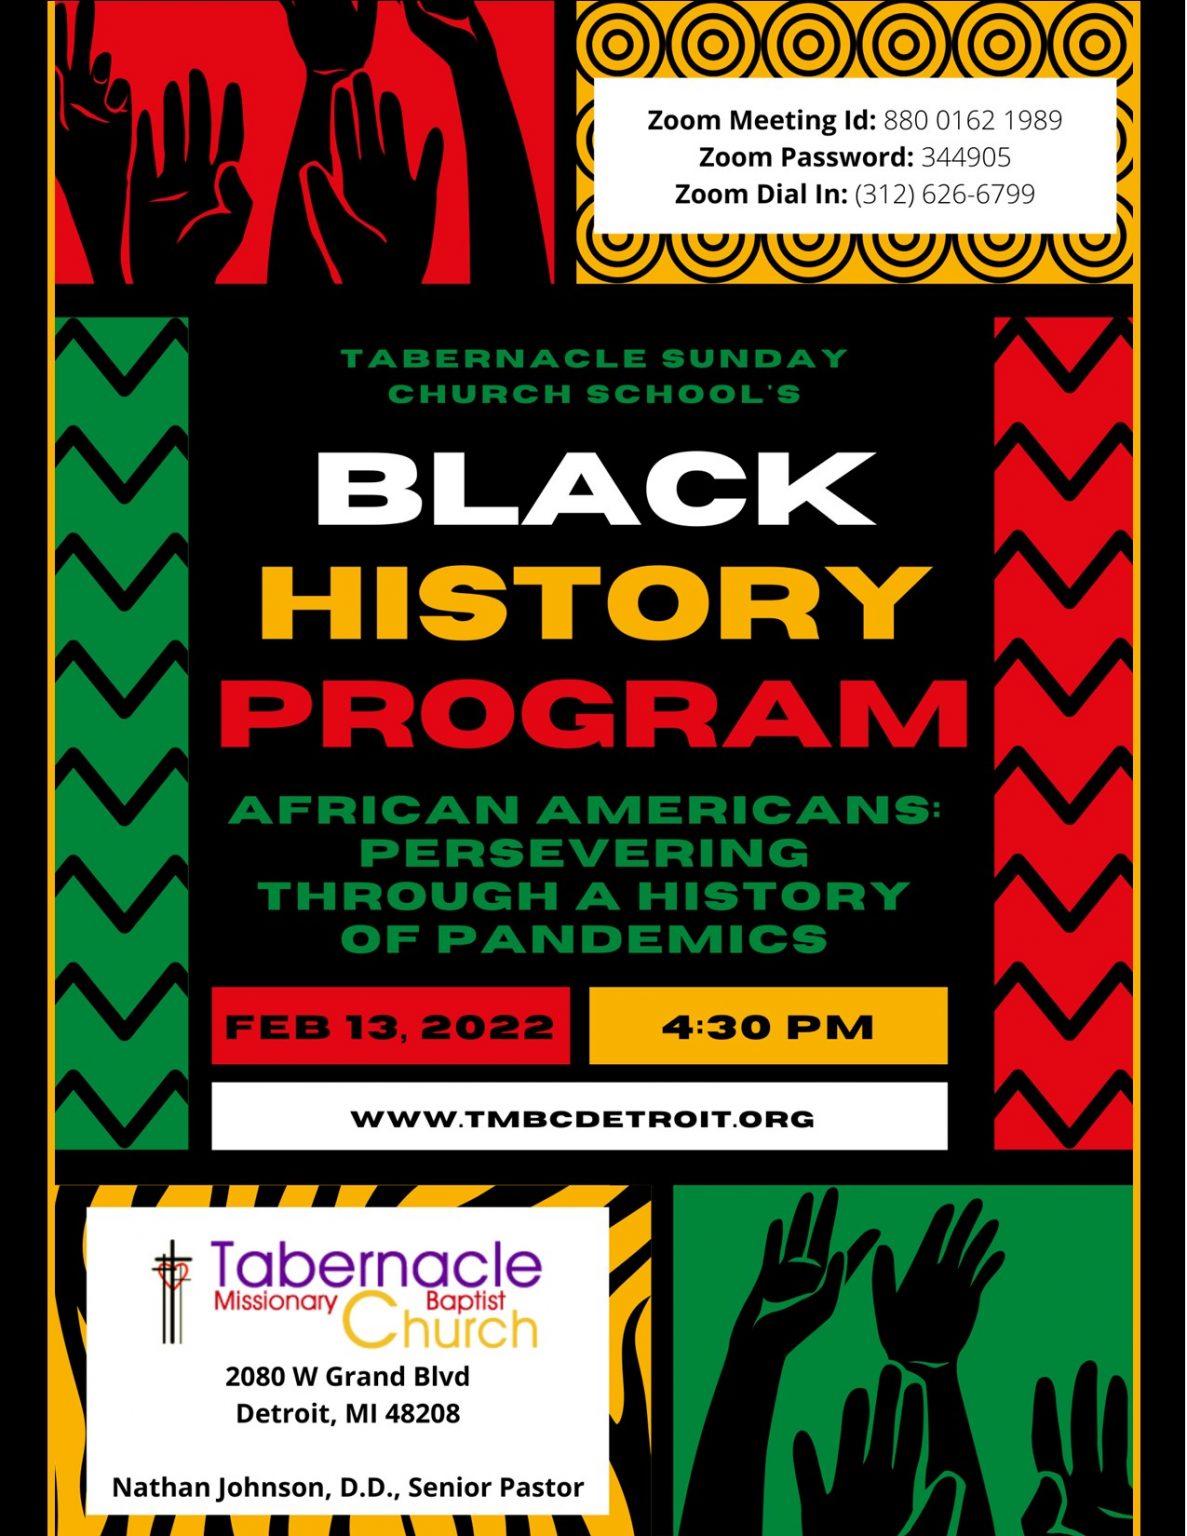 examples of black history programs for church